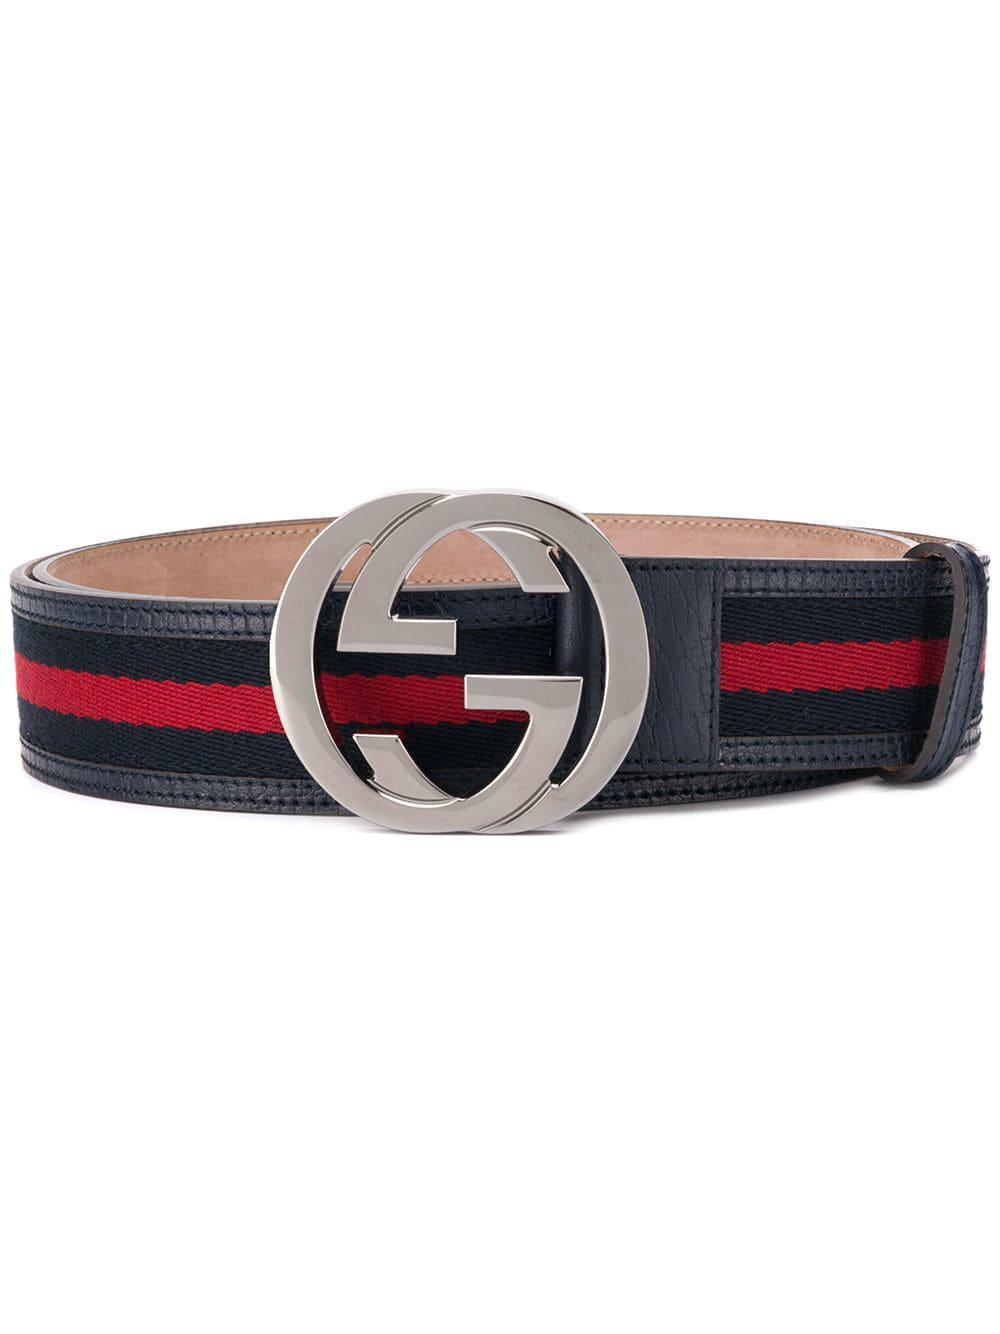 gucci belt red and blue